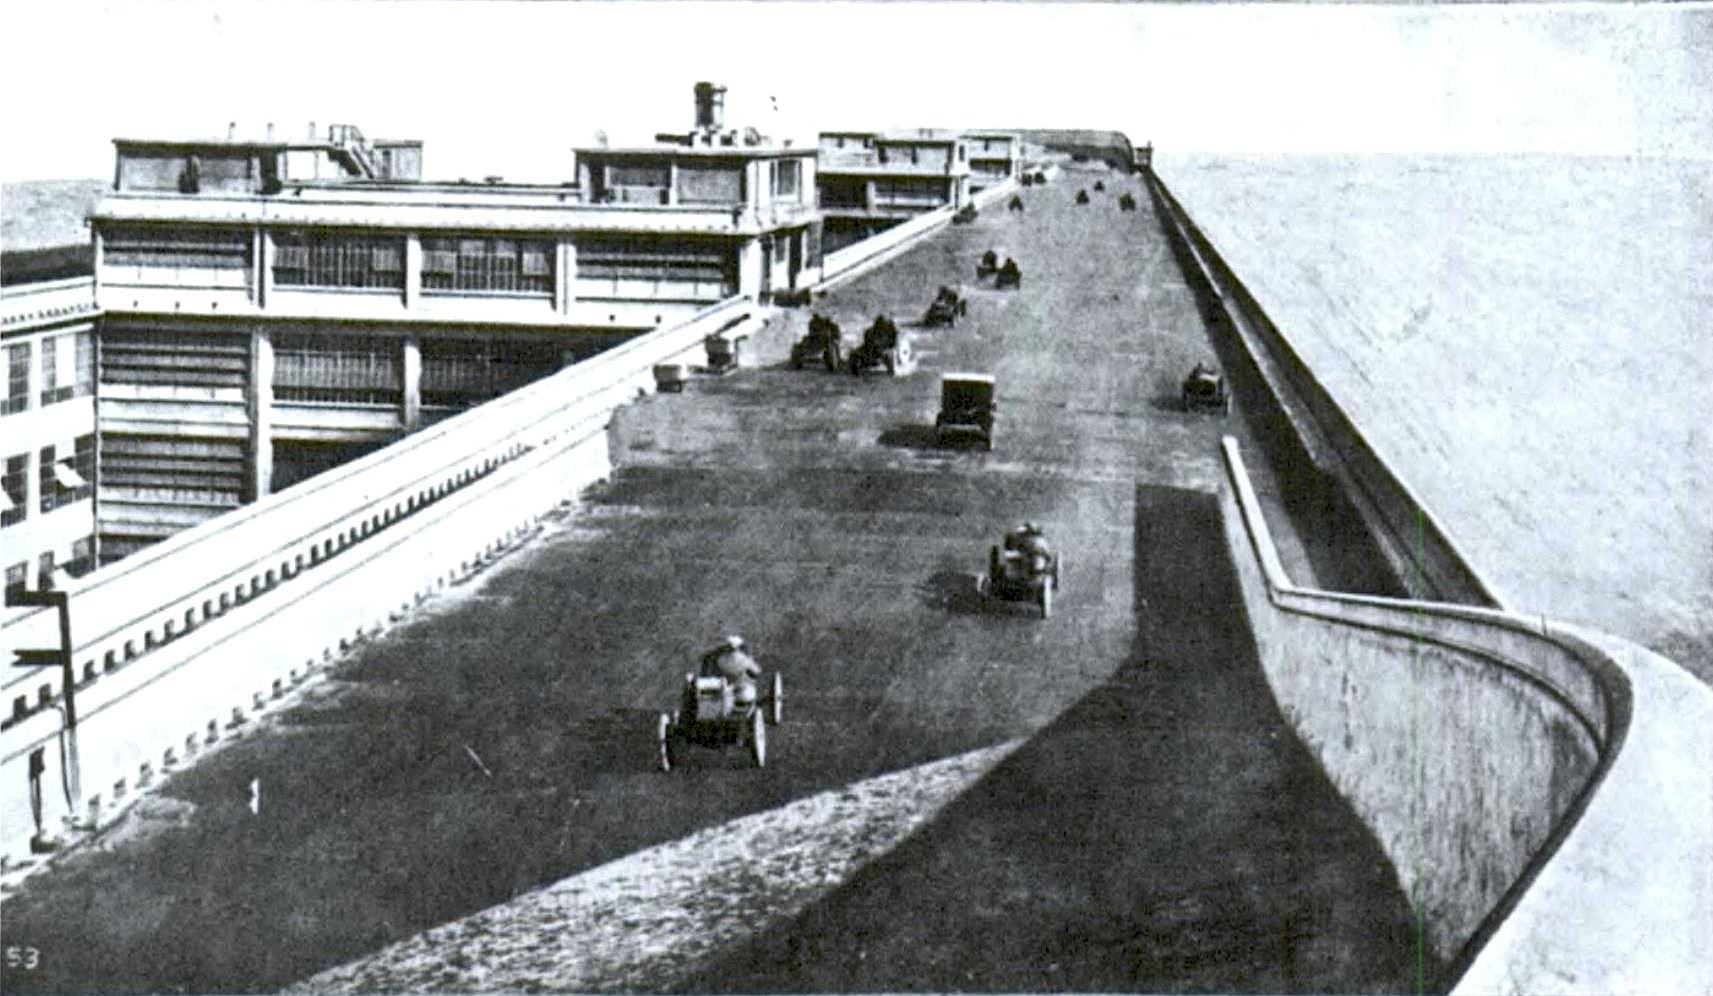 The roof of the Lingotto Building which housed the Fiat Automotive Company in Turin, Italy in 1924. Opened the year before, the factory was unique as they would test the cars right on the roof. All sorts of tests were possible and it was in use to some capacity until the 1970s, and then the building shut down completely in 1982.